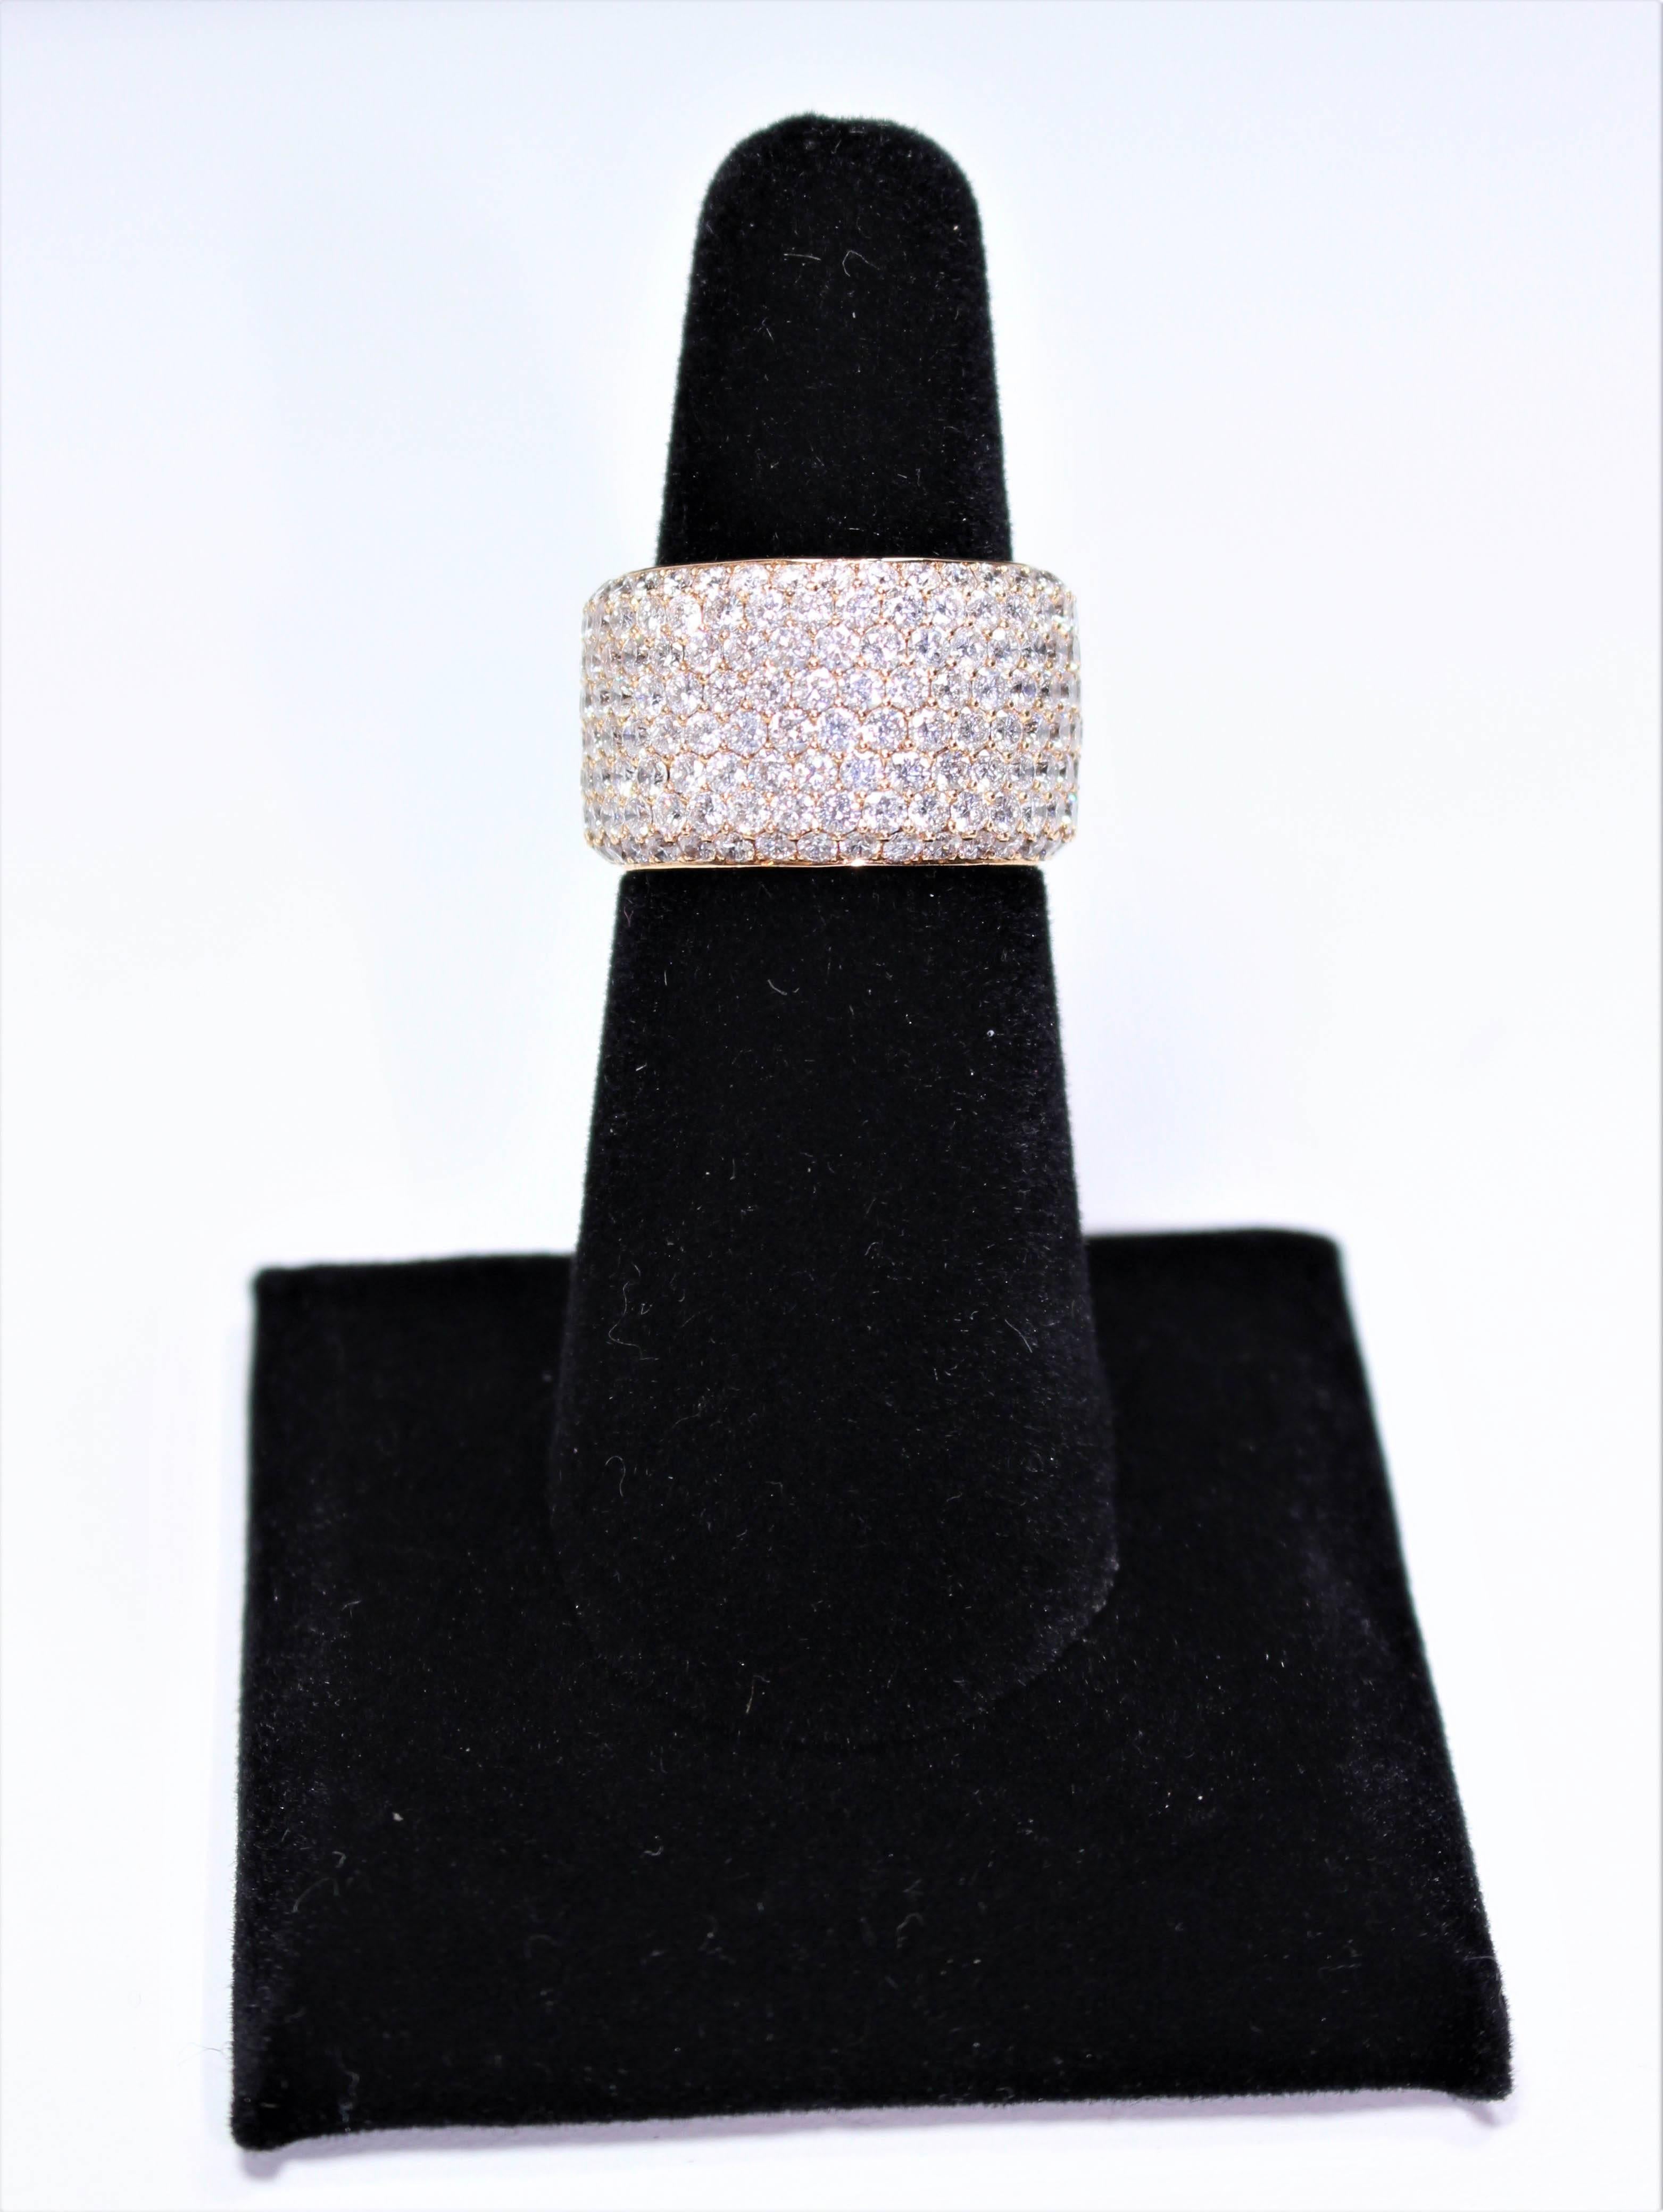 This ring is composed of a stunning 18 KT Rose gold featuring an eternity band design. Lavished with approximately 272 brilliant round cut pave diamonds boosting an approximate 7.59 Total Carat Weight (2.0mm and .03 carats each). Size 7, not